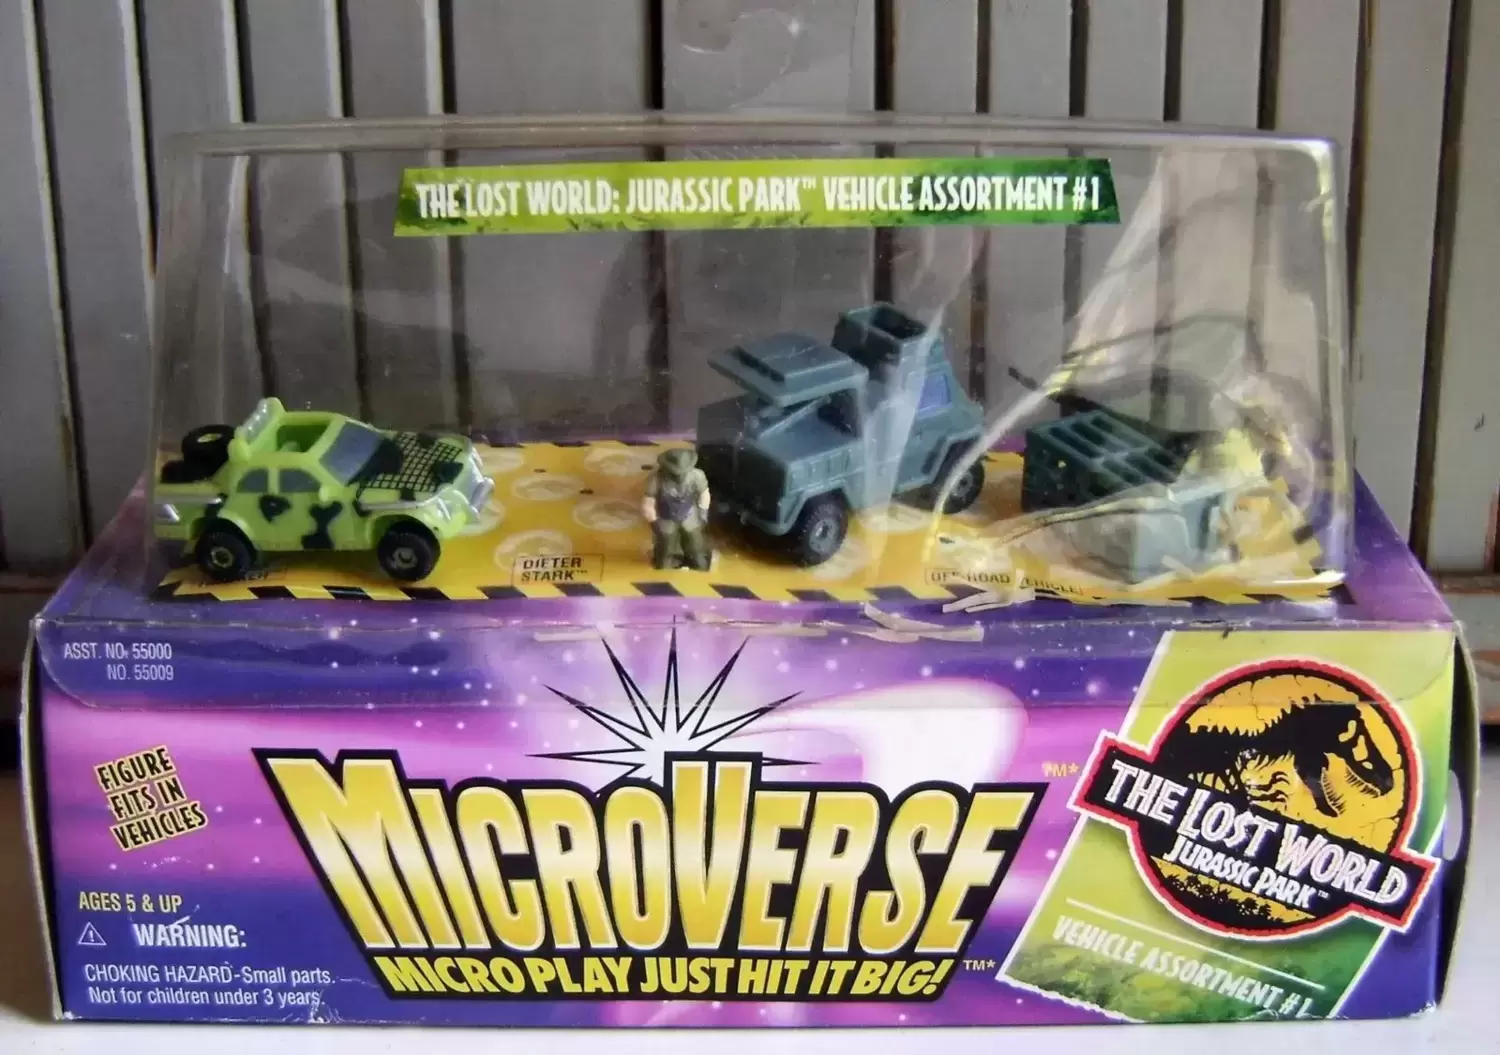 Microverse - The Lost World - Jurassic Park Vehicle Assortment #1